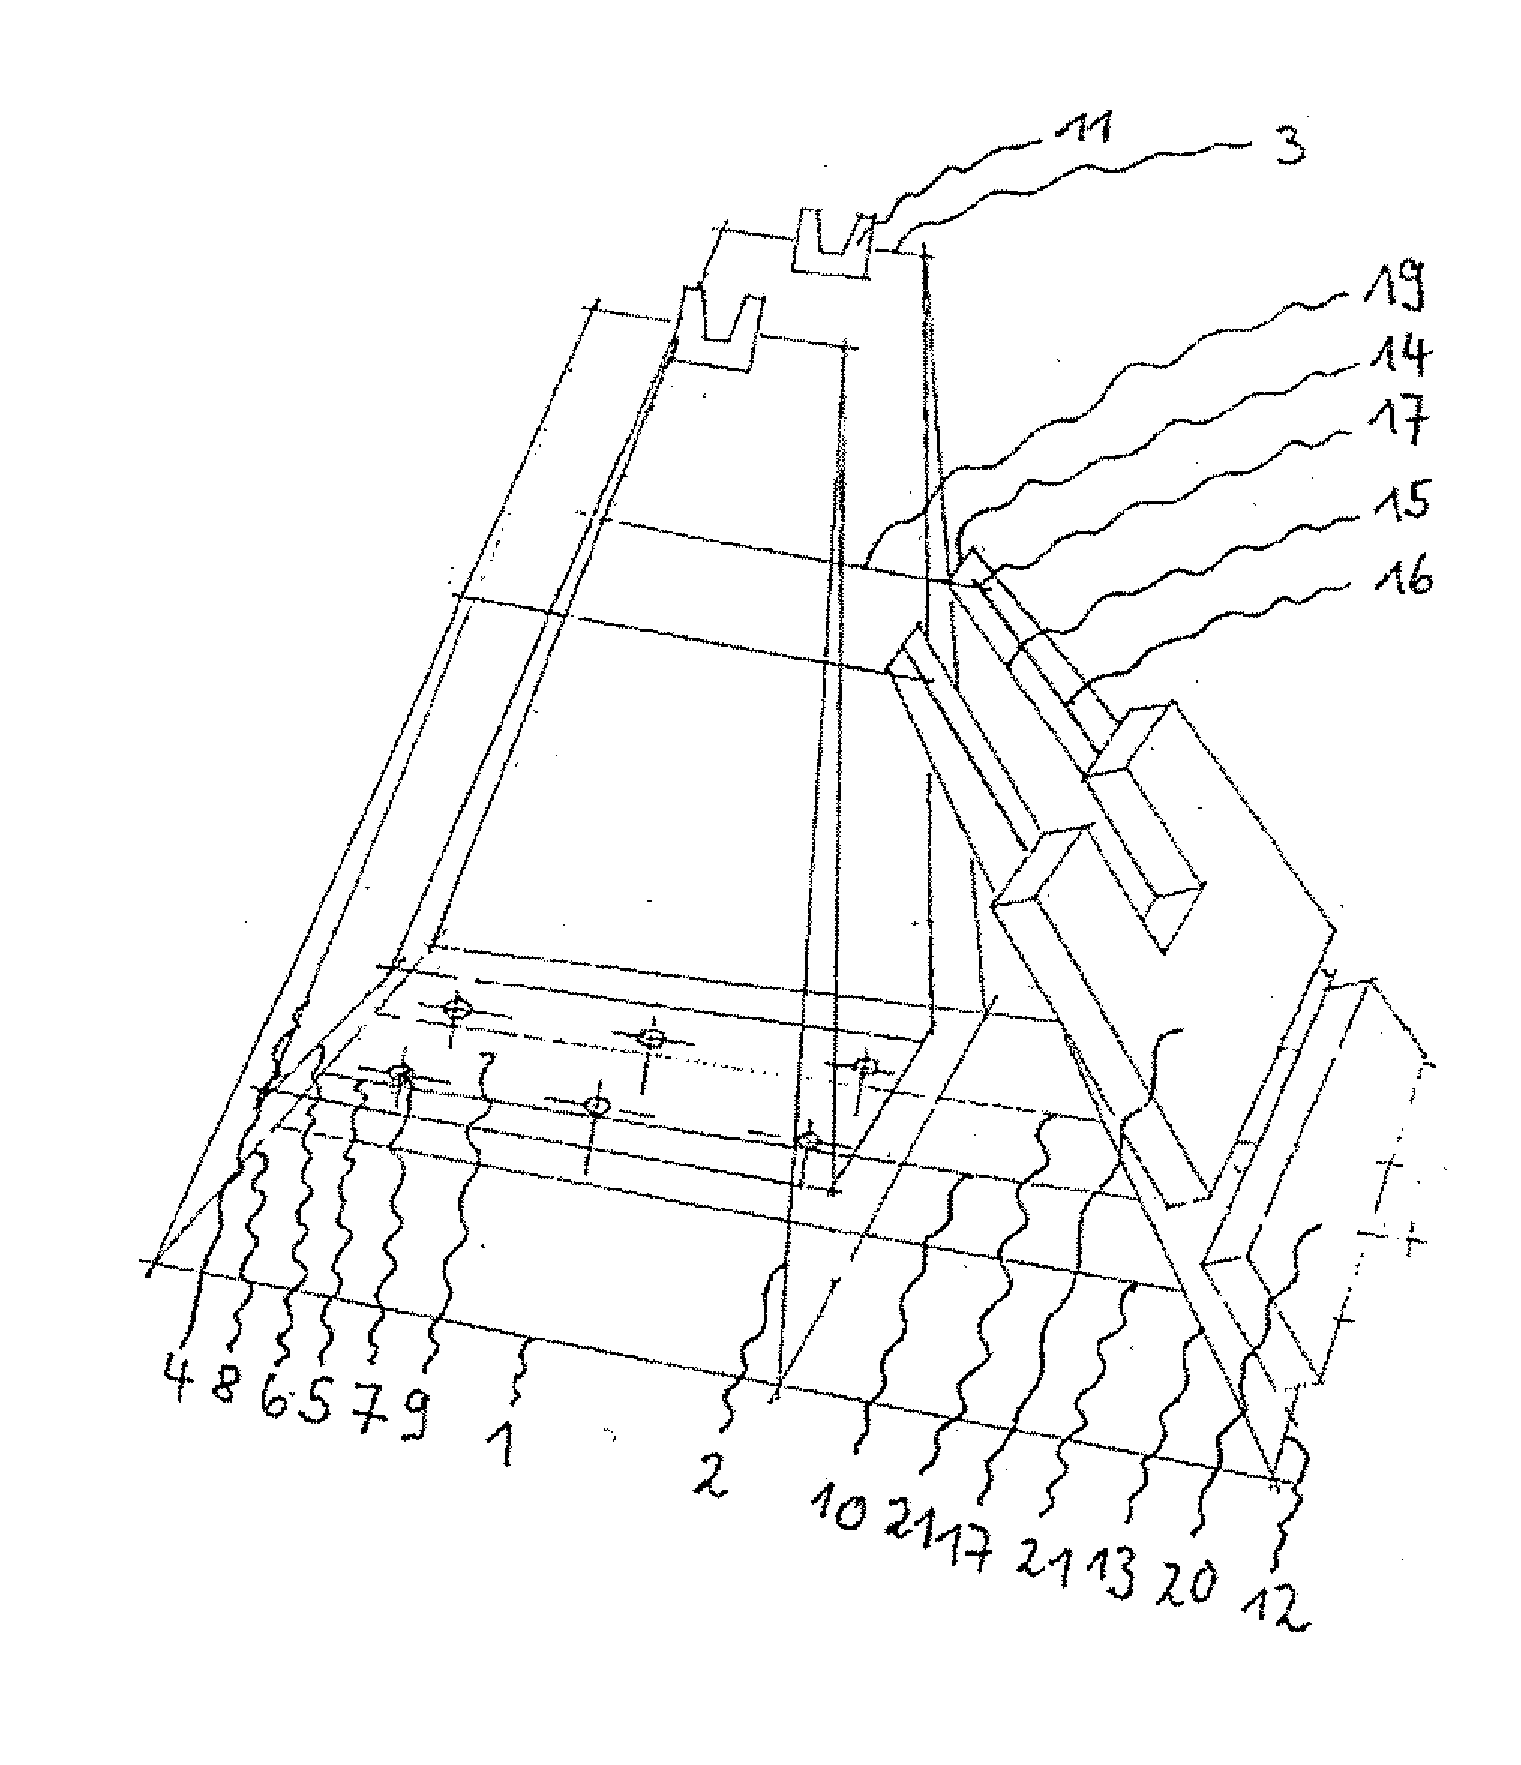 Device for truing and regulating the tension of spoked running wheels